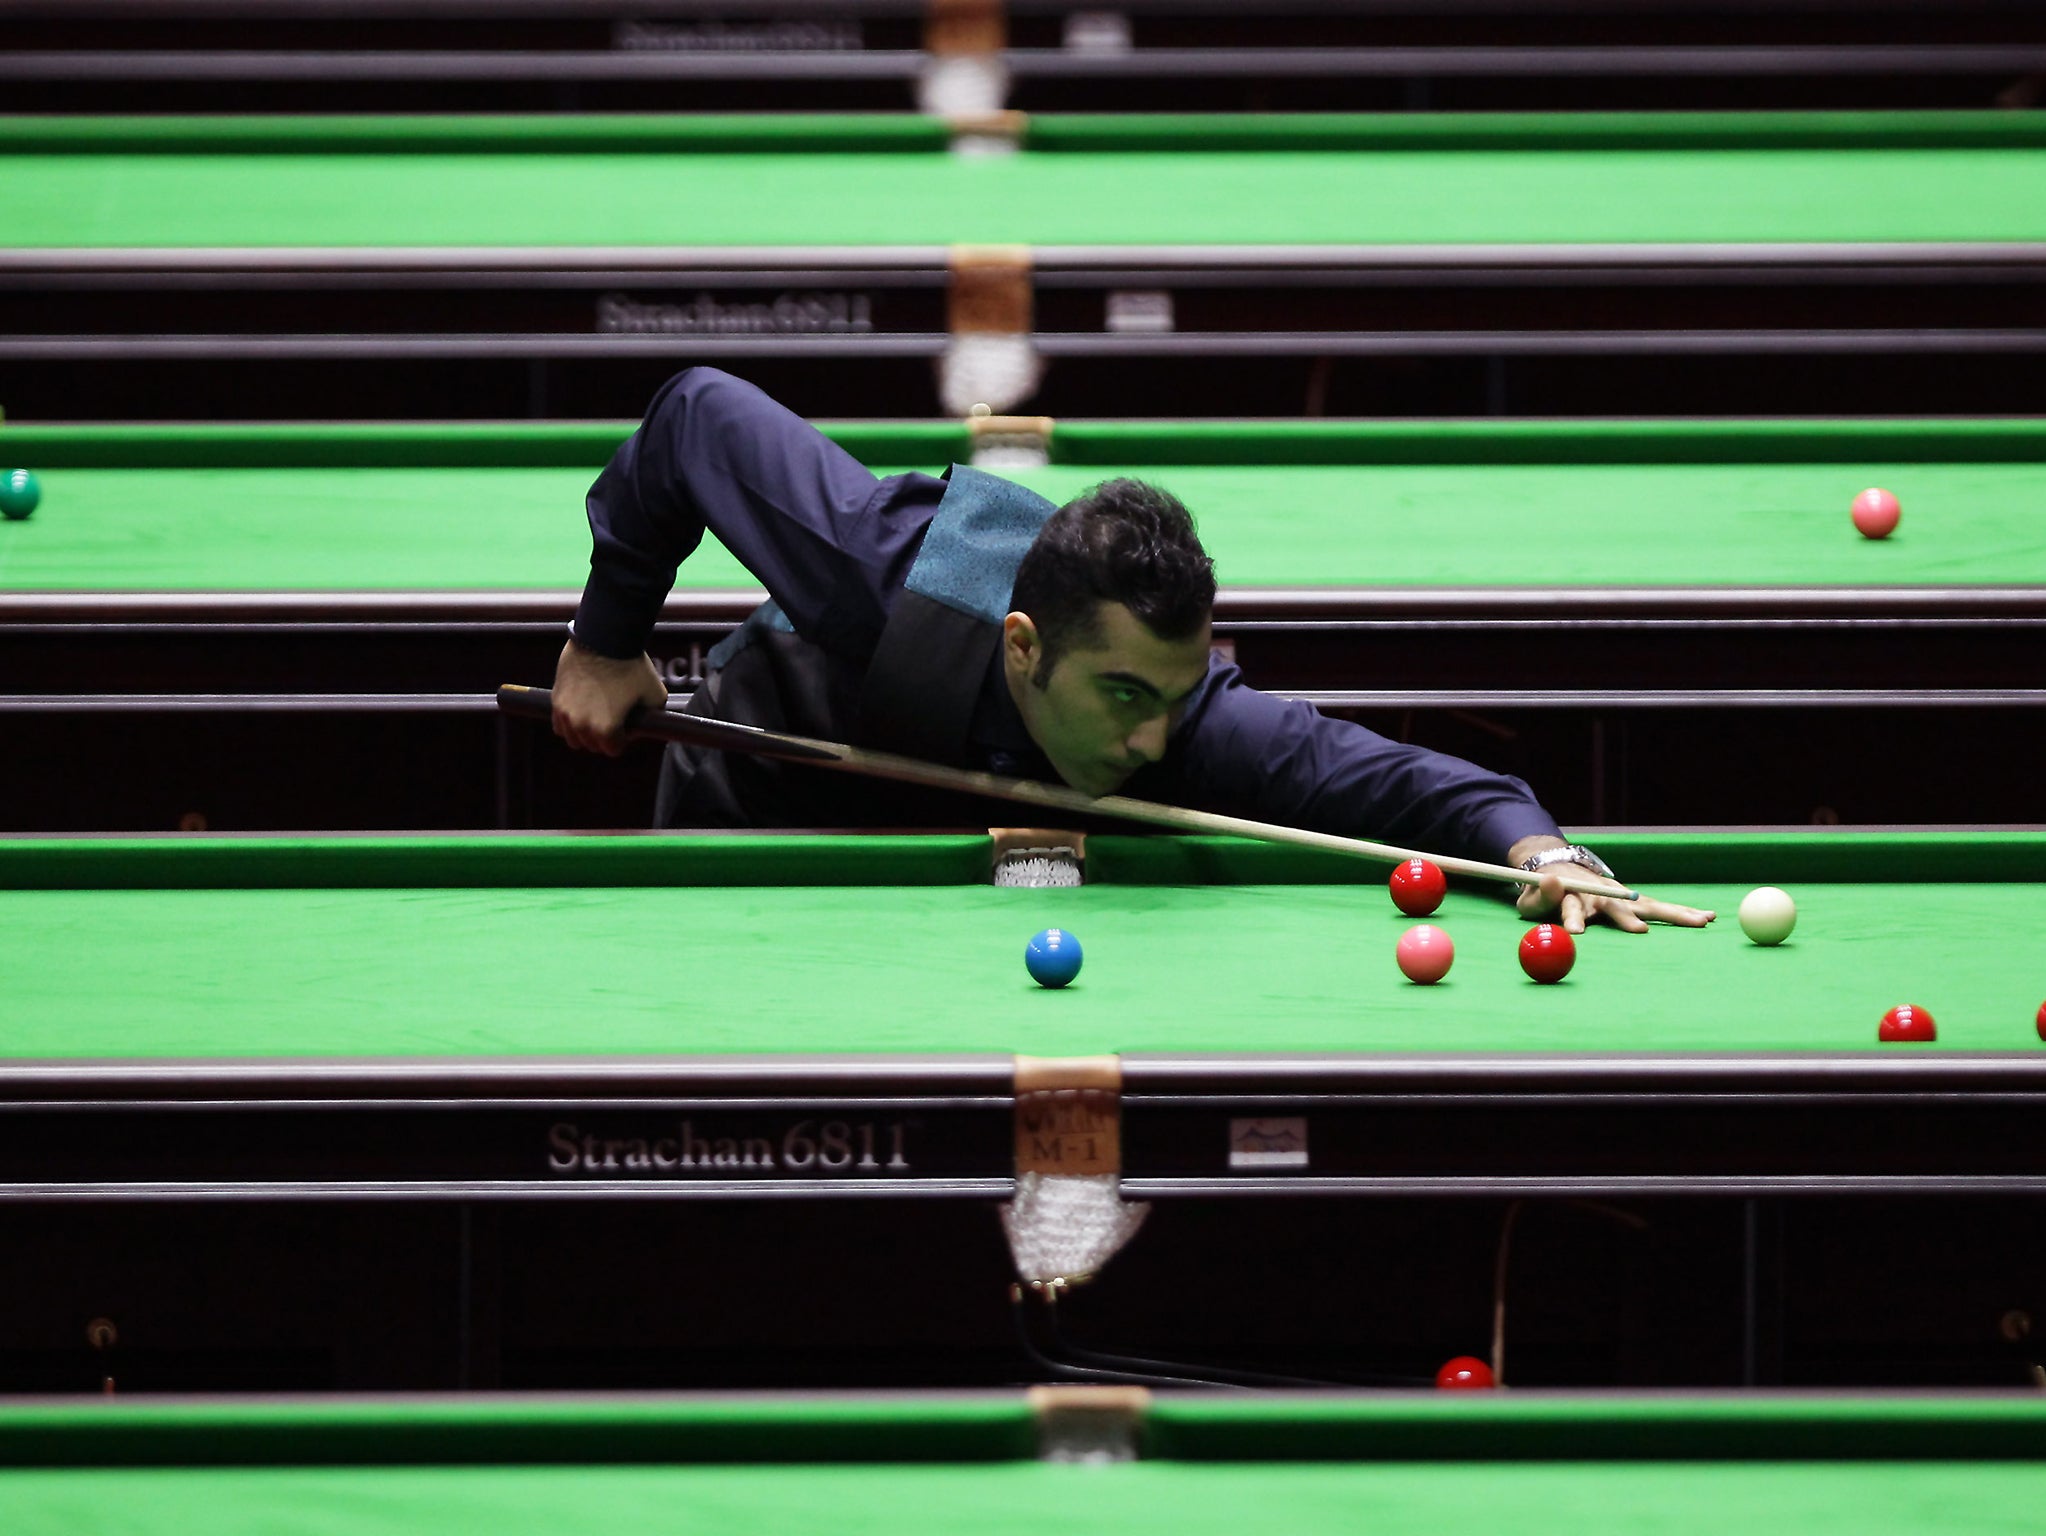 Meet Hossein Vafaei The Miracle Kid who became the first Iranian professional in the history of snooker The Independent The Independent picture